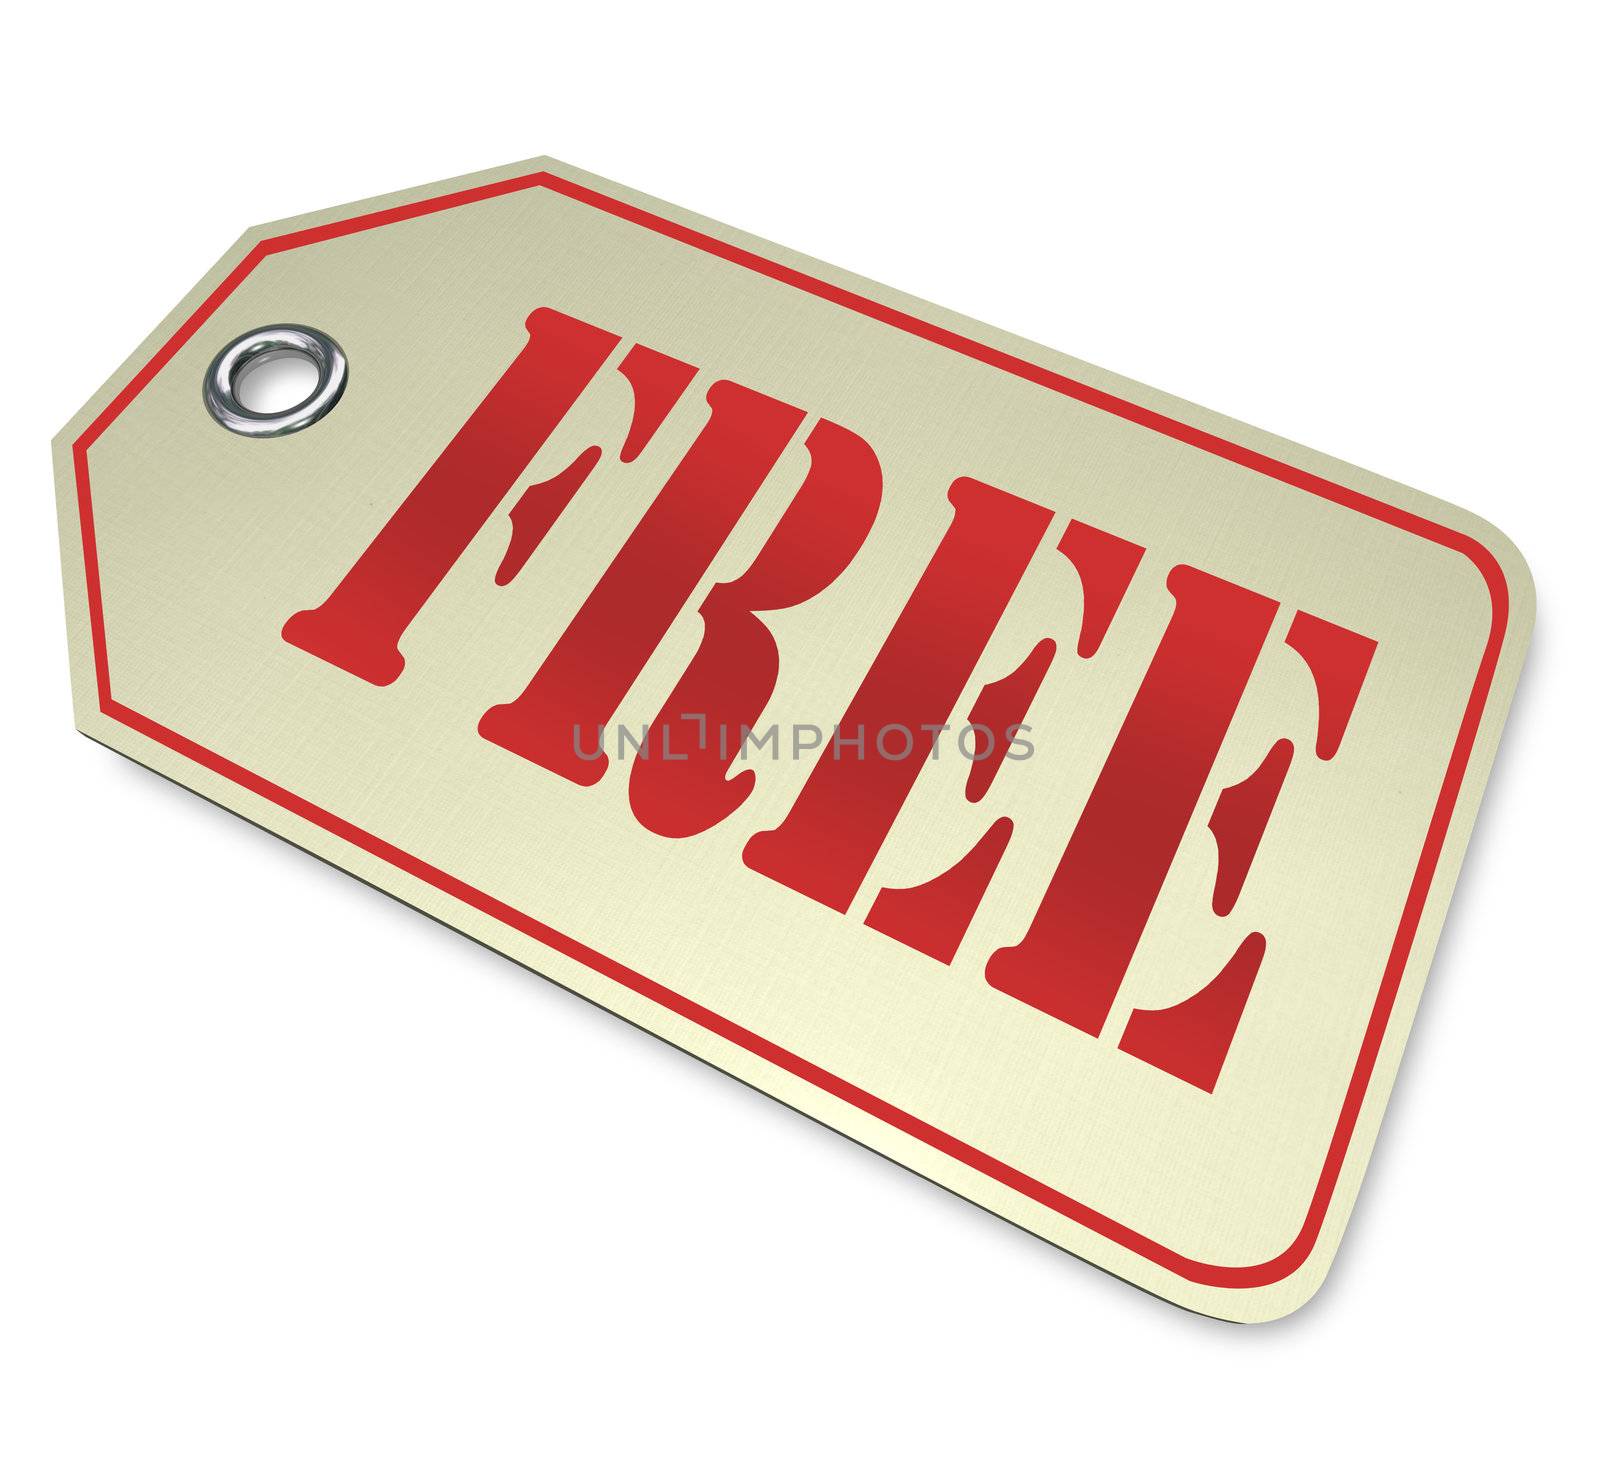 A price tag with the word Free on it, representing a complimentary item in a discount sale or clearance event